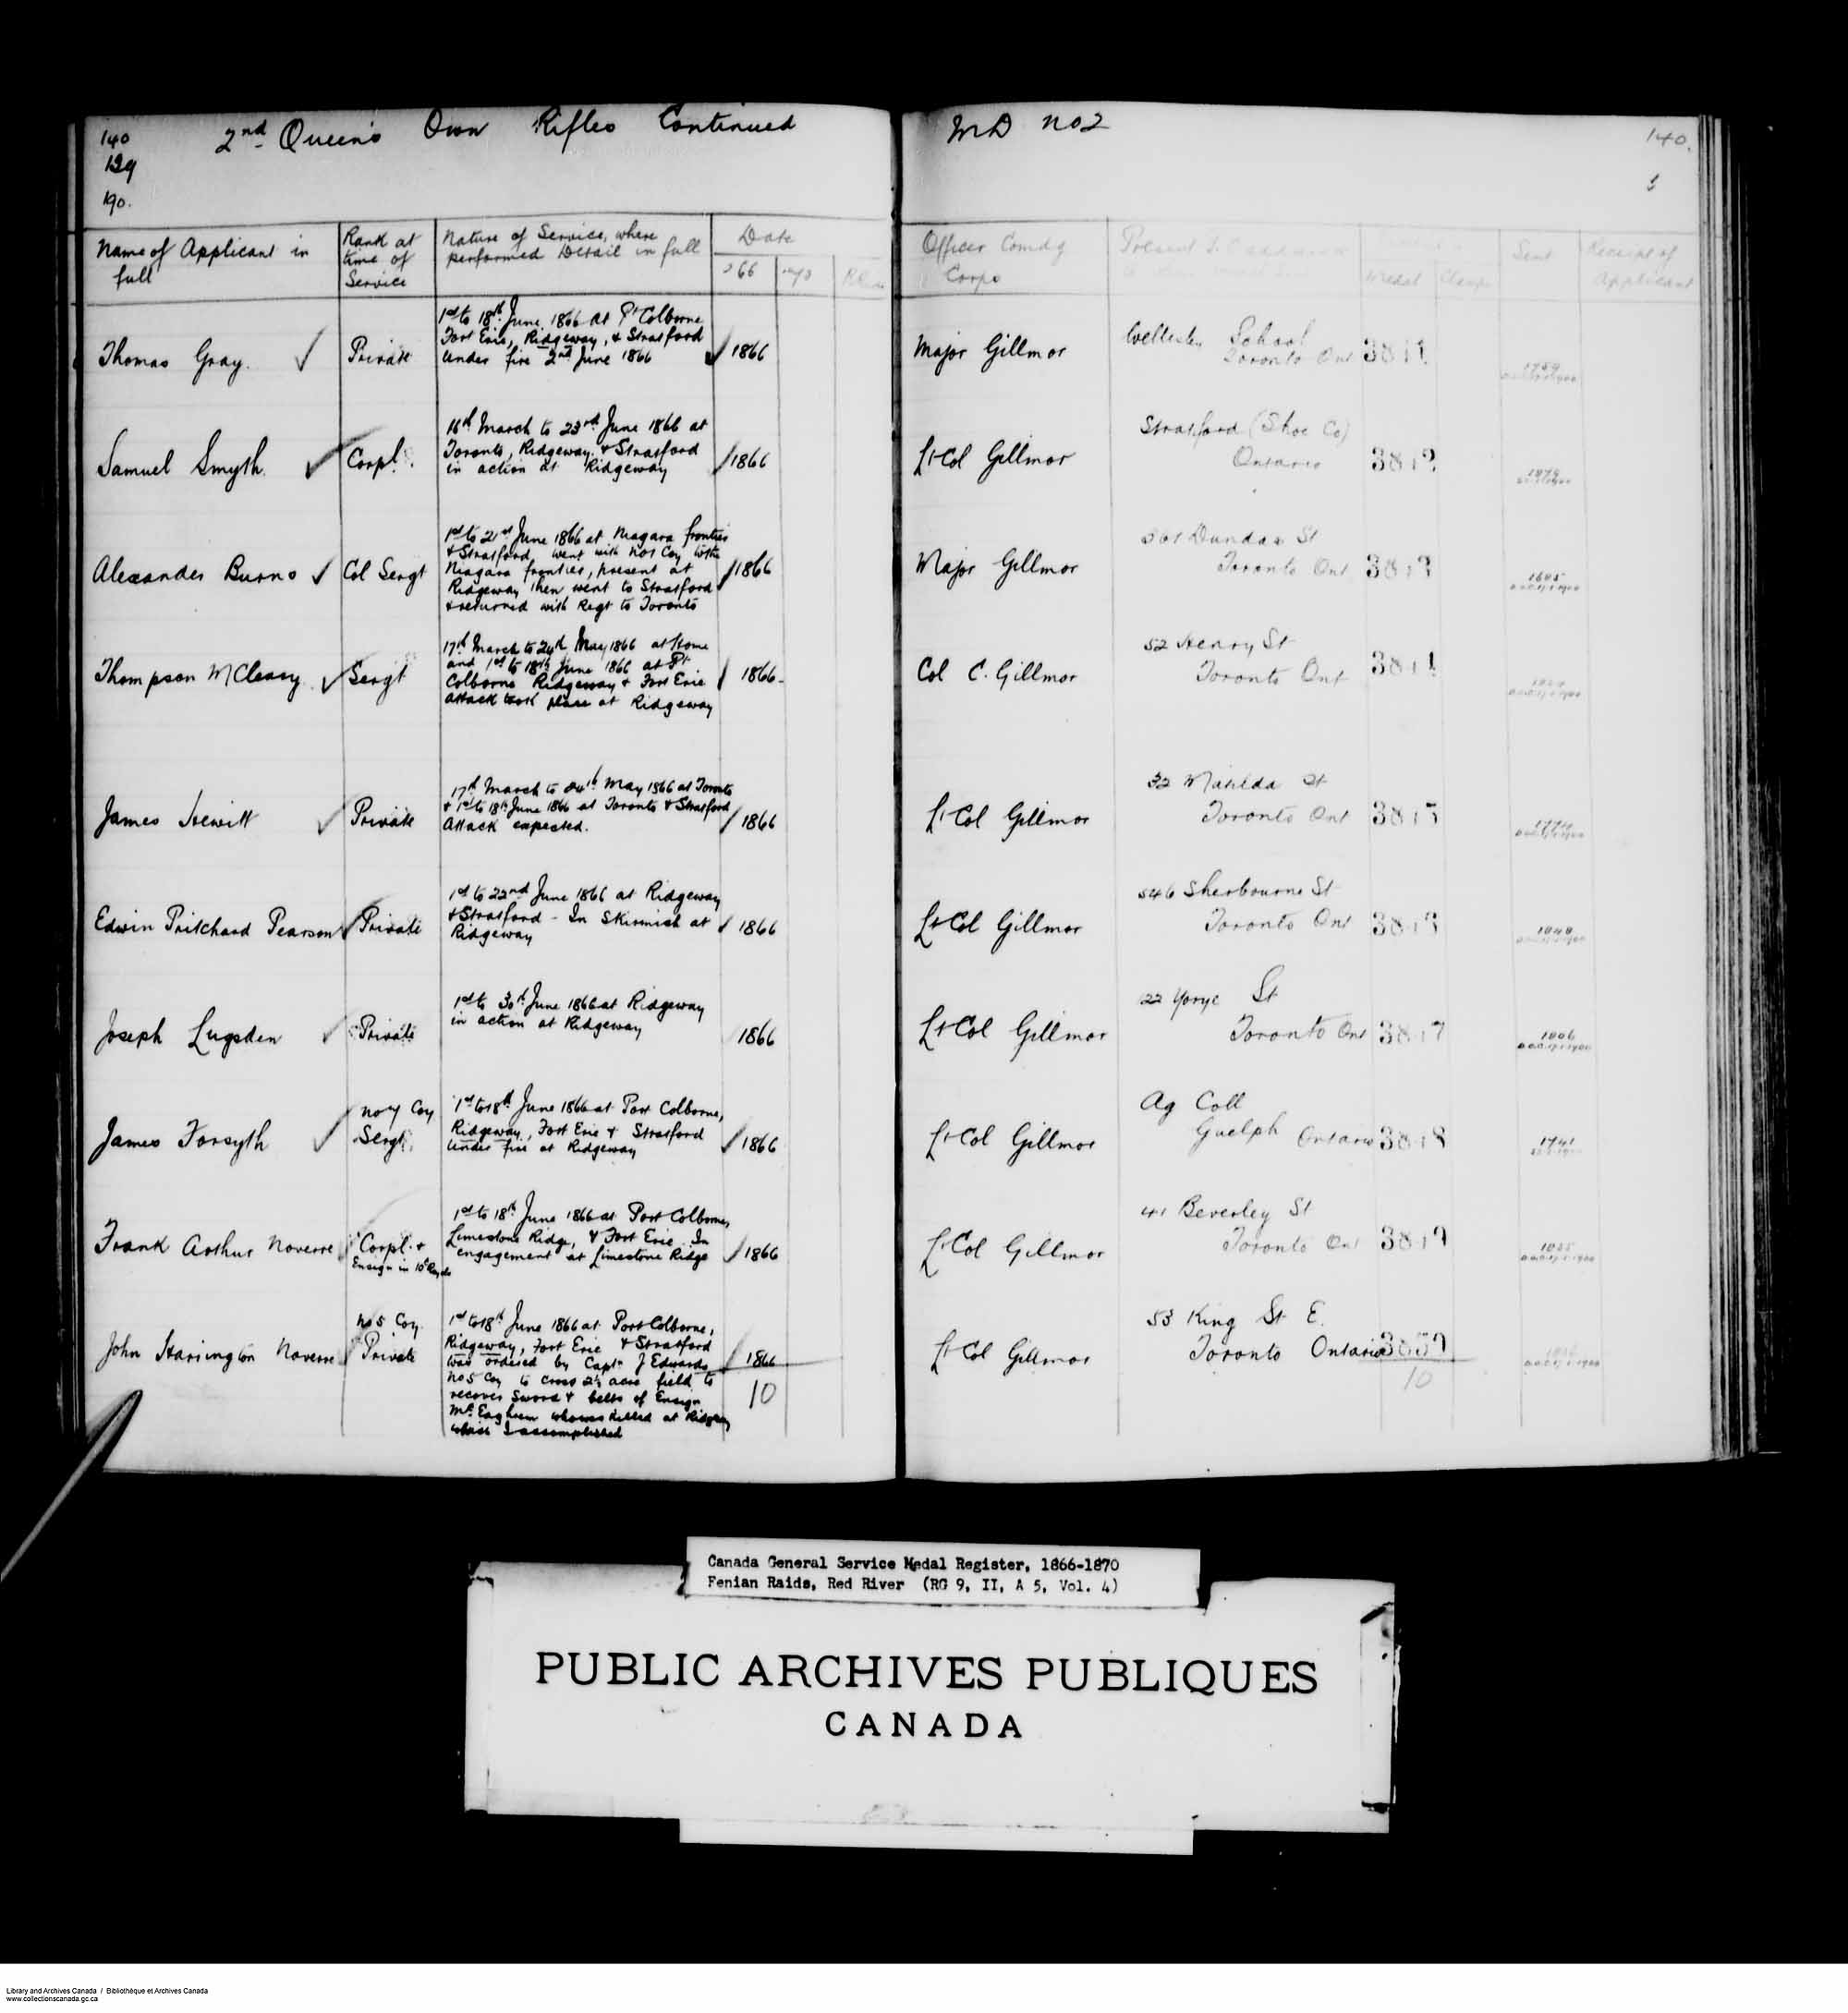 Digitized page of Medals, Honours and Awards for Image No.: e008681827